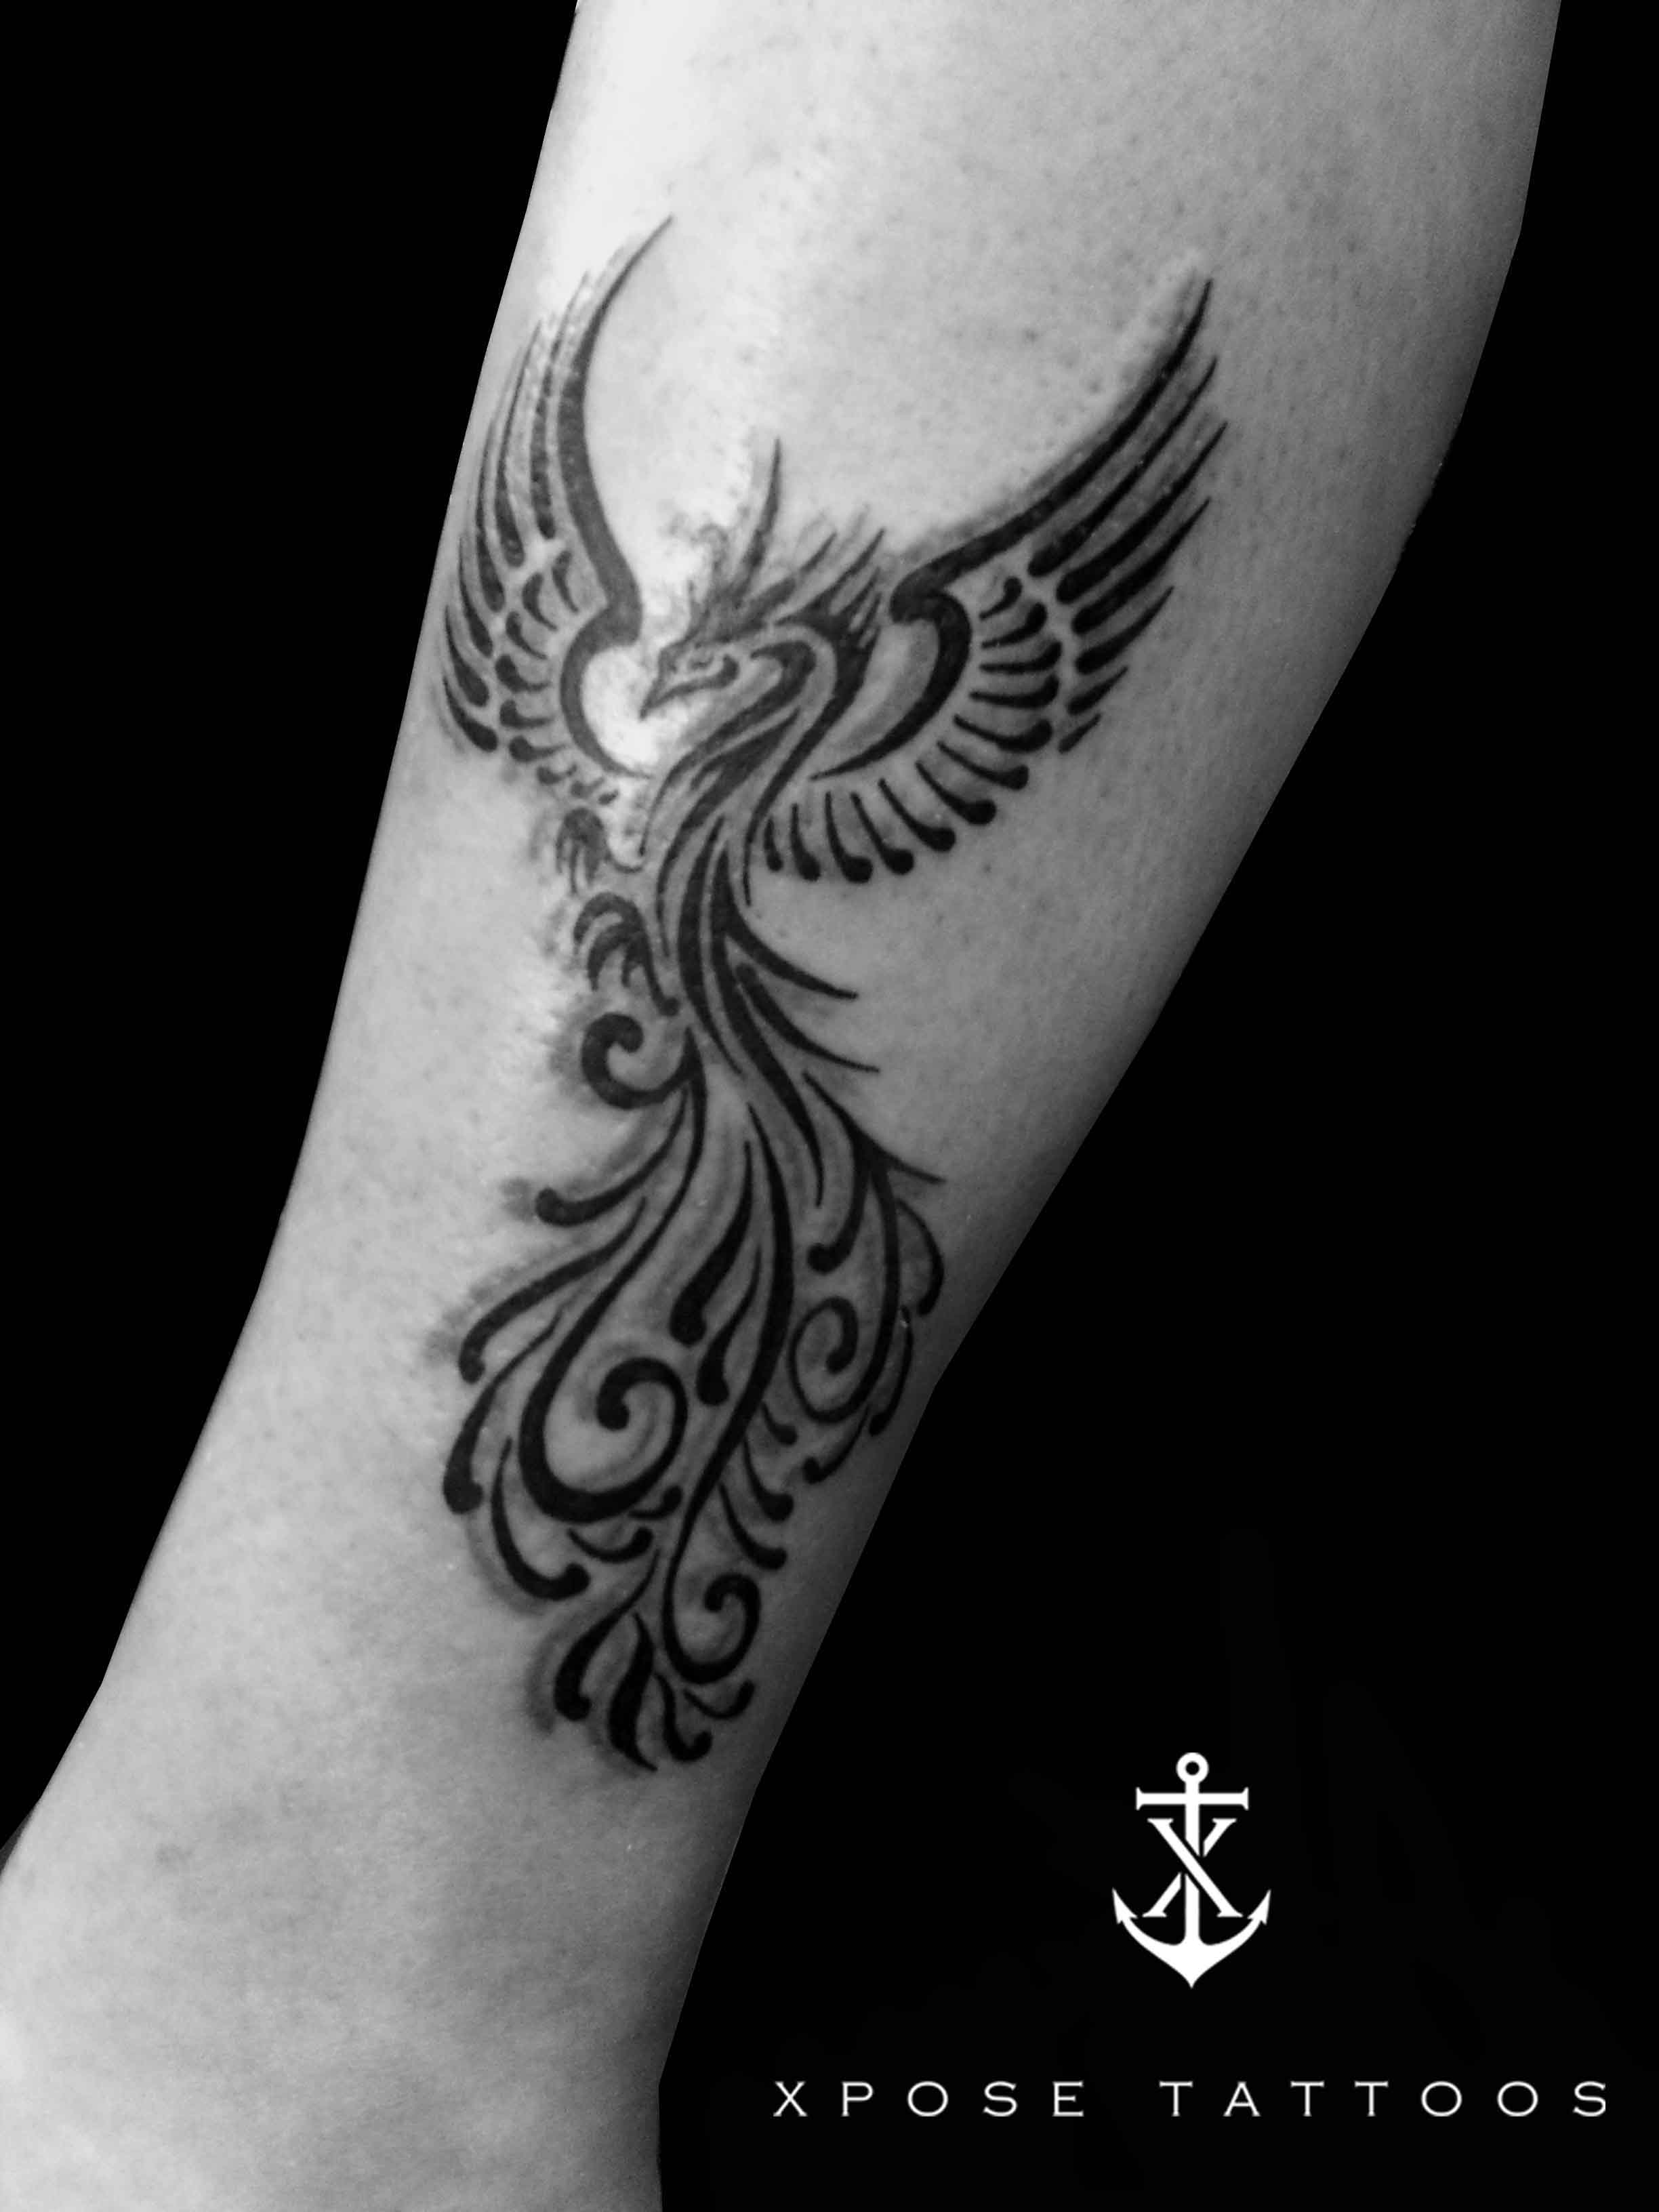 Black Ink Tribal Phoenix Tattoo Design For Forearm By Xpose